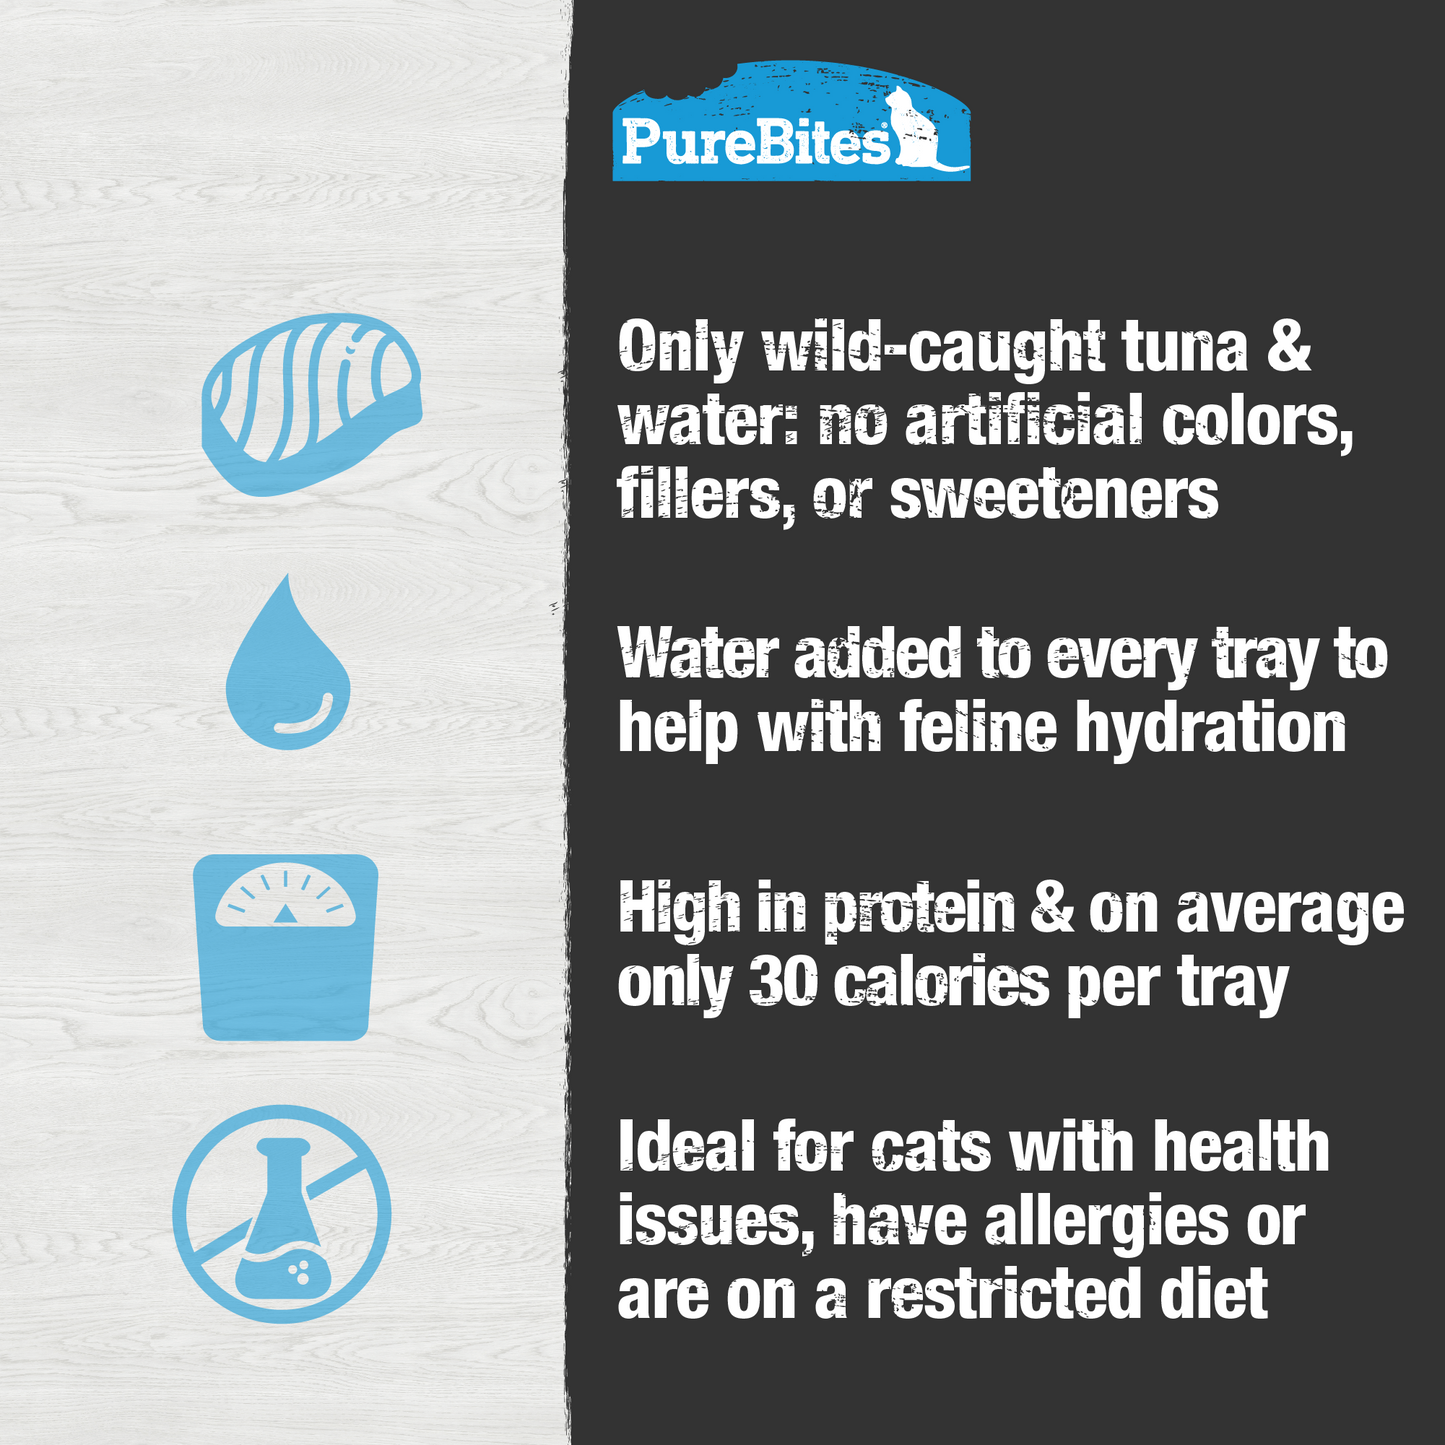 Make snack time or mealtime exciting for picky eaters!  A nutritious and flavorful feast; 100% natural, high in protein, low in calories (only 30 calories per tray), and with water added for the essential hydration cats need